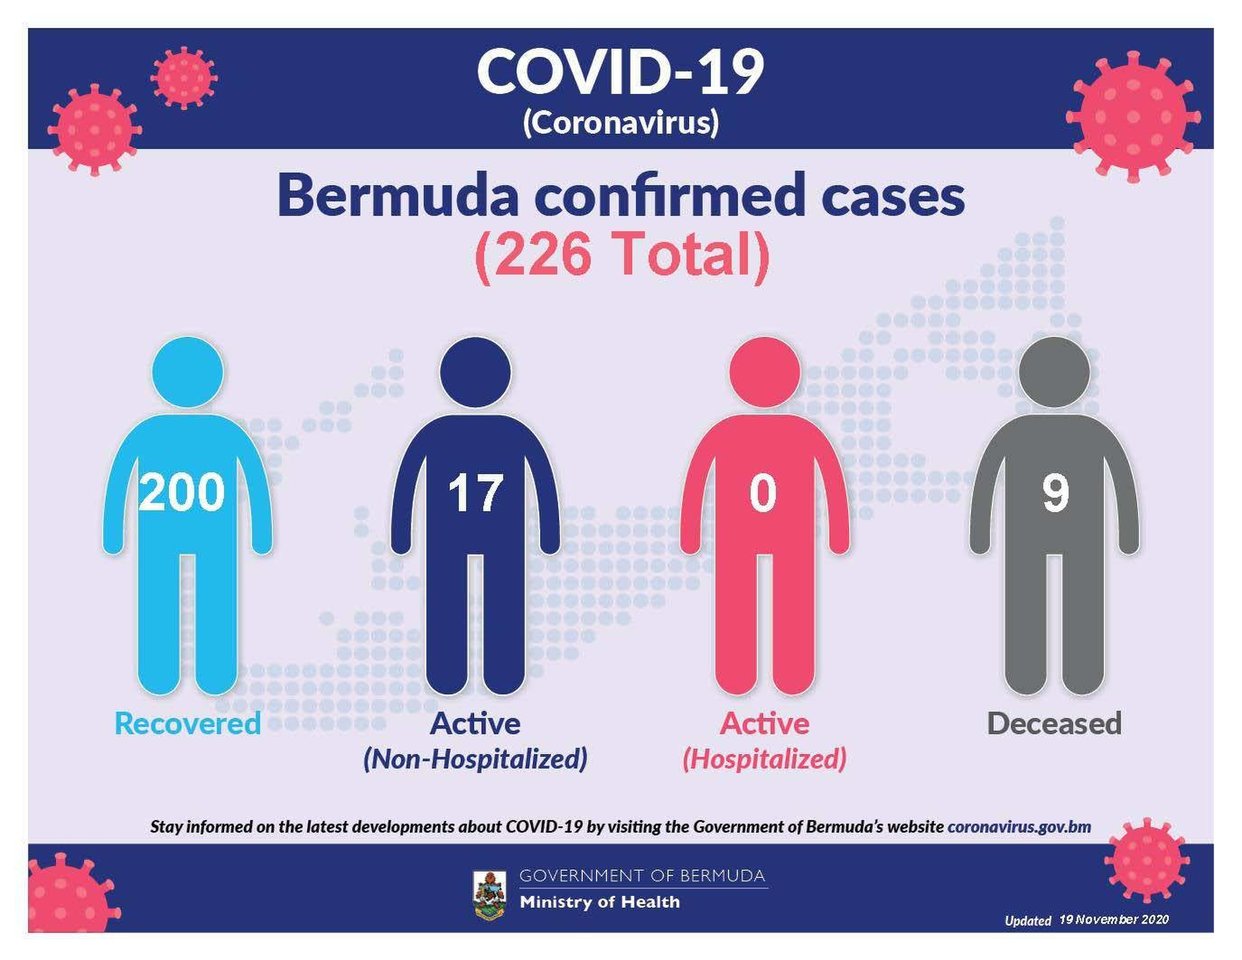 Two new positive COVID-19 cases reported in Bermuda, 19 November